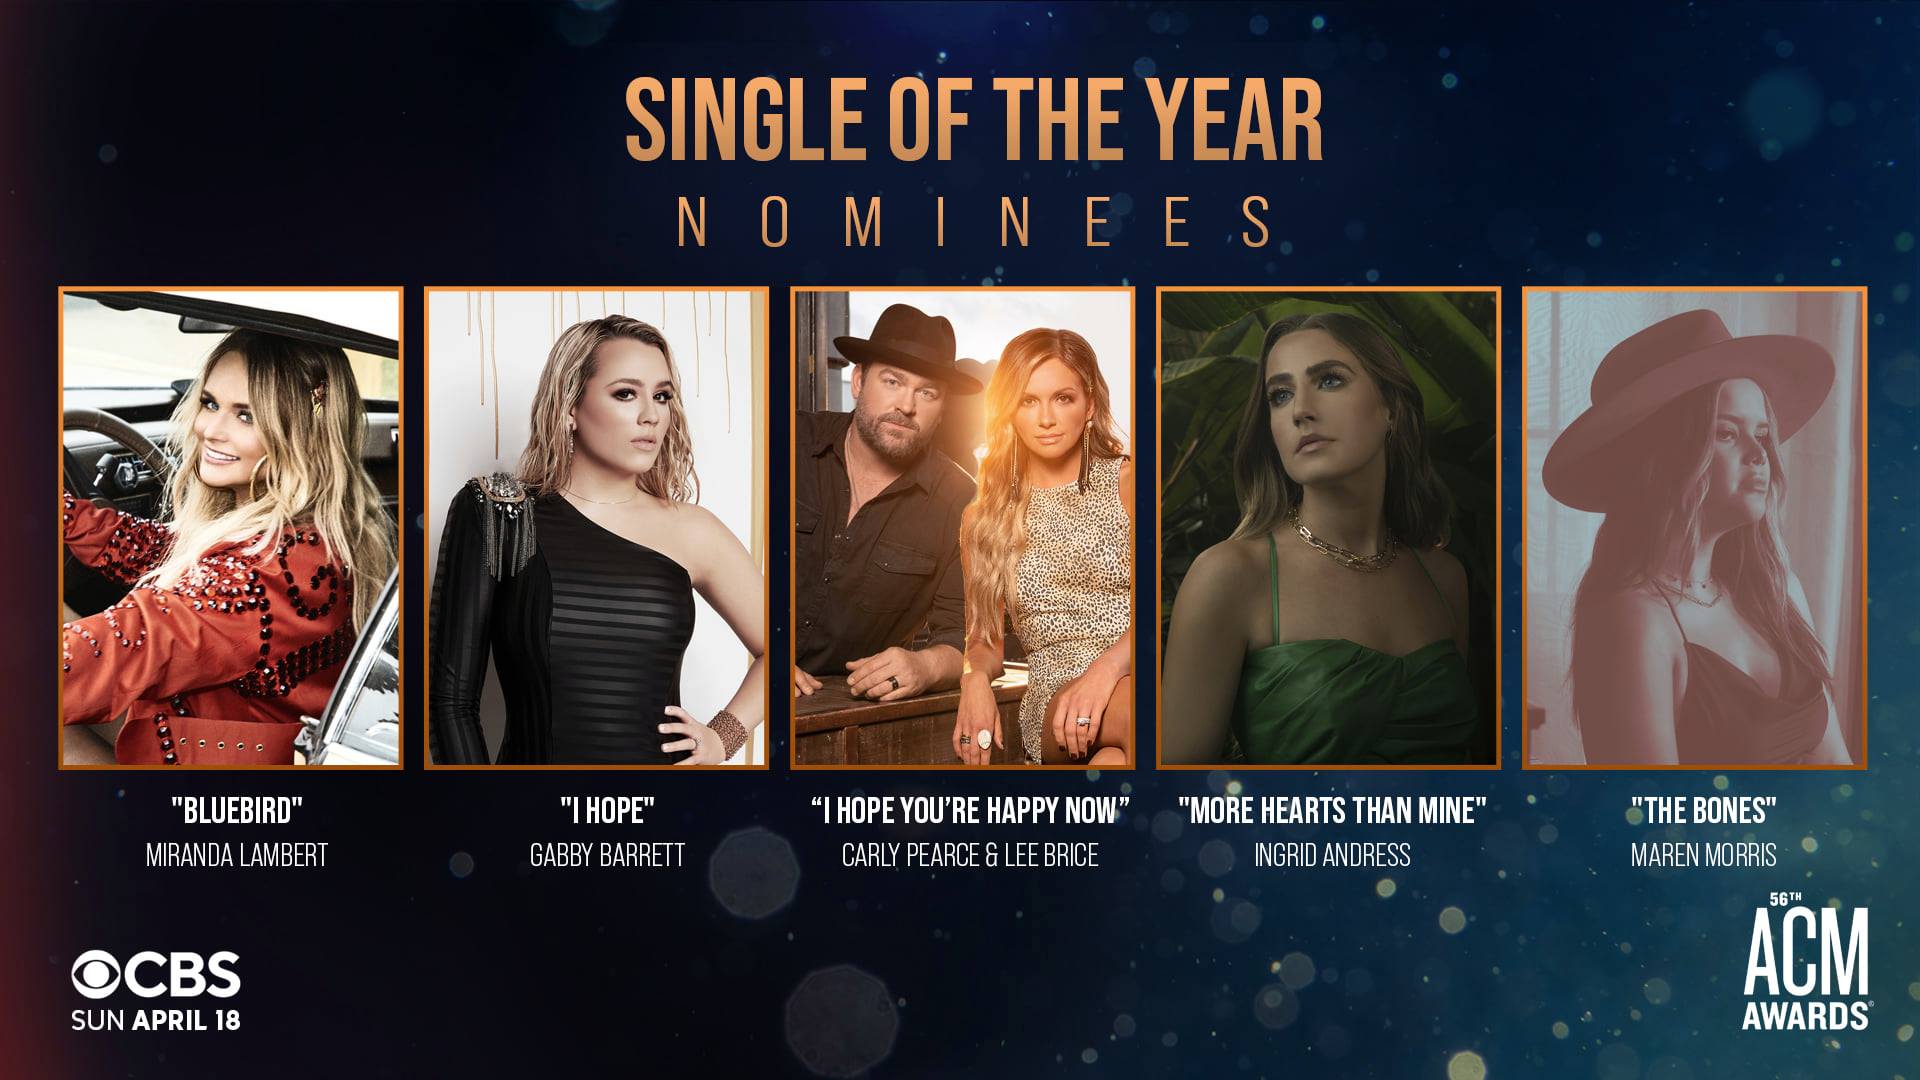 Gabby Barrett earned ACM Awards nomination for Single of the Year (“I Hope”).
